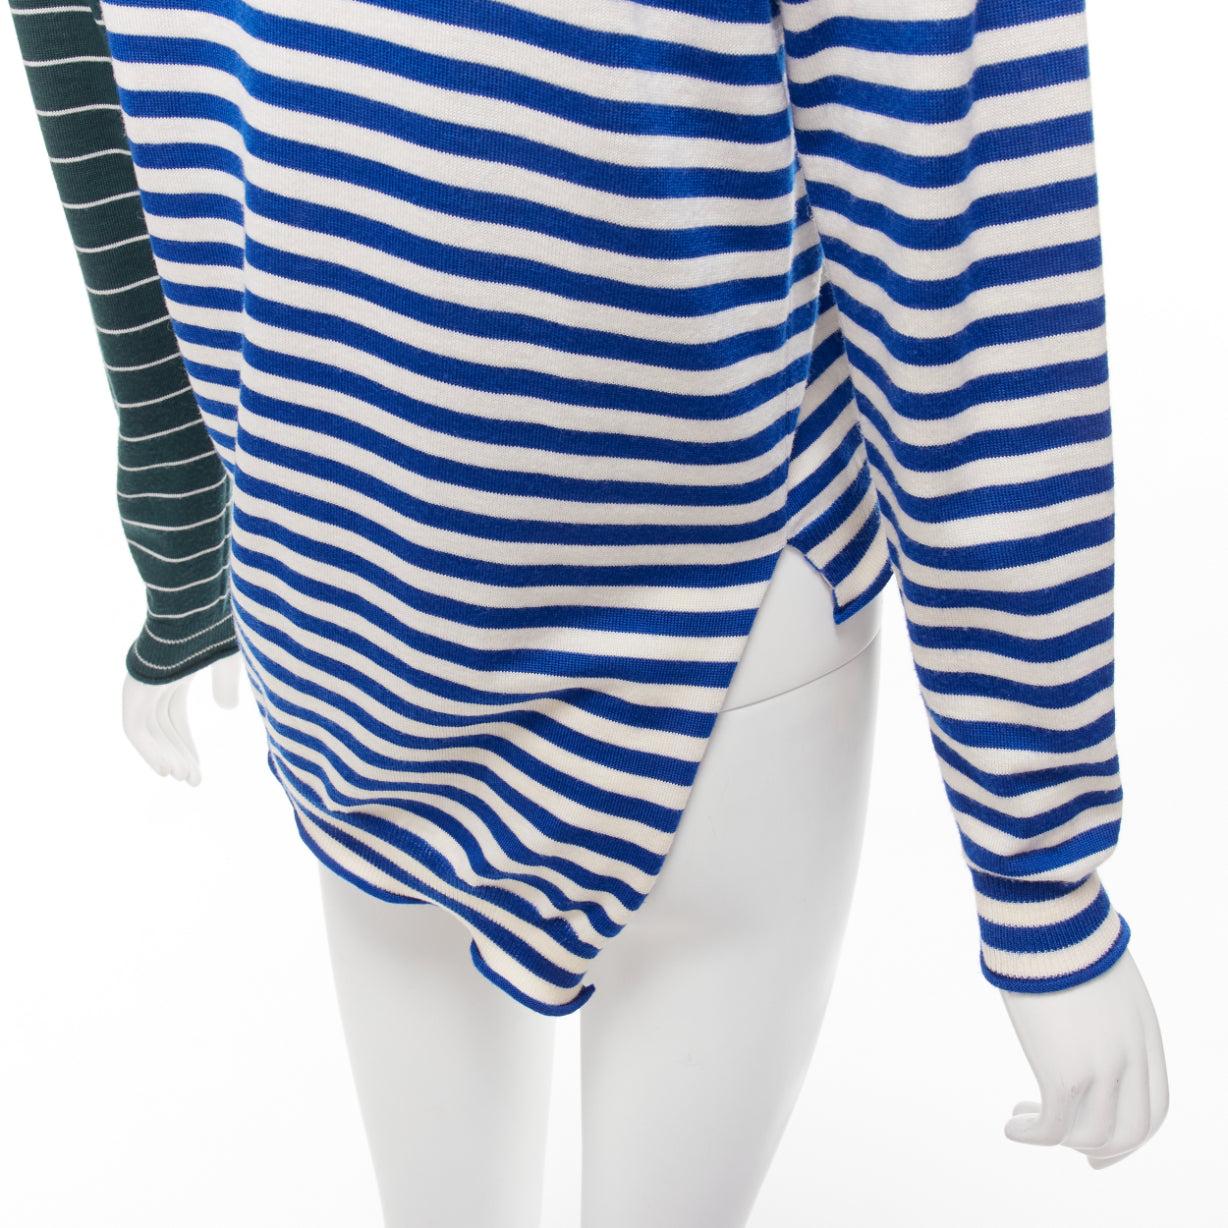 PORTS 1961 blue white green stripes asymmetric hem sweater
Reference: NKLL/A00156
Brand: Ports 1961
Material: Feels like wool
Color: Blue, Green
Pattern: Striped
Closure: Pullover

CONDITION:
Condition: Very good, this item was pre-owned and is in